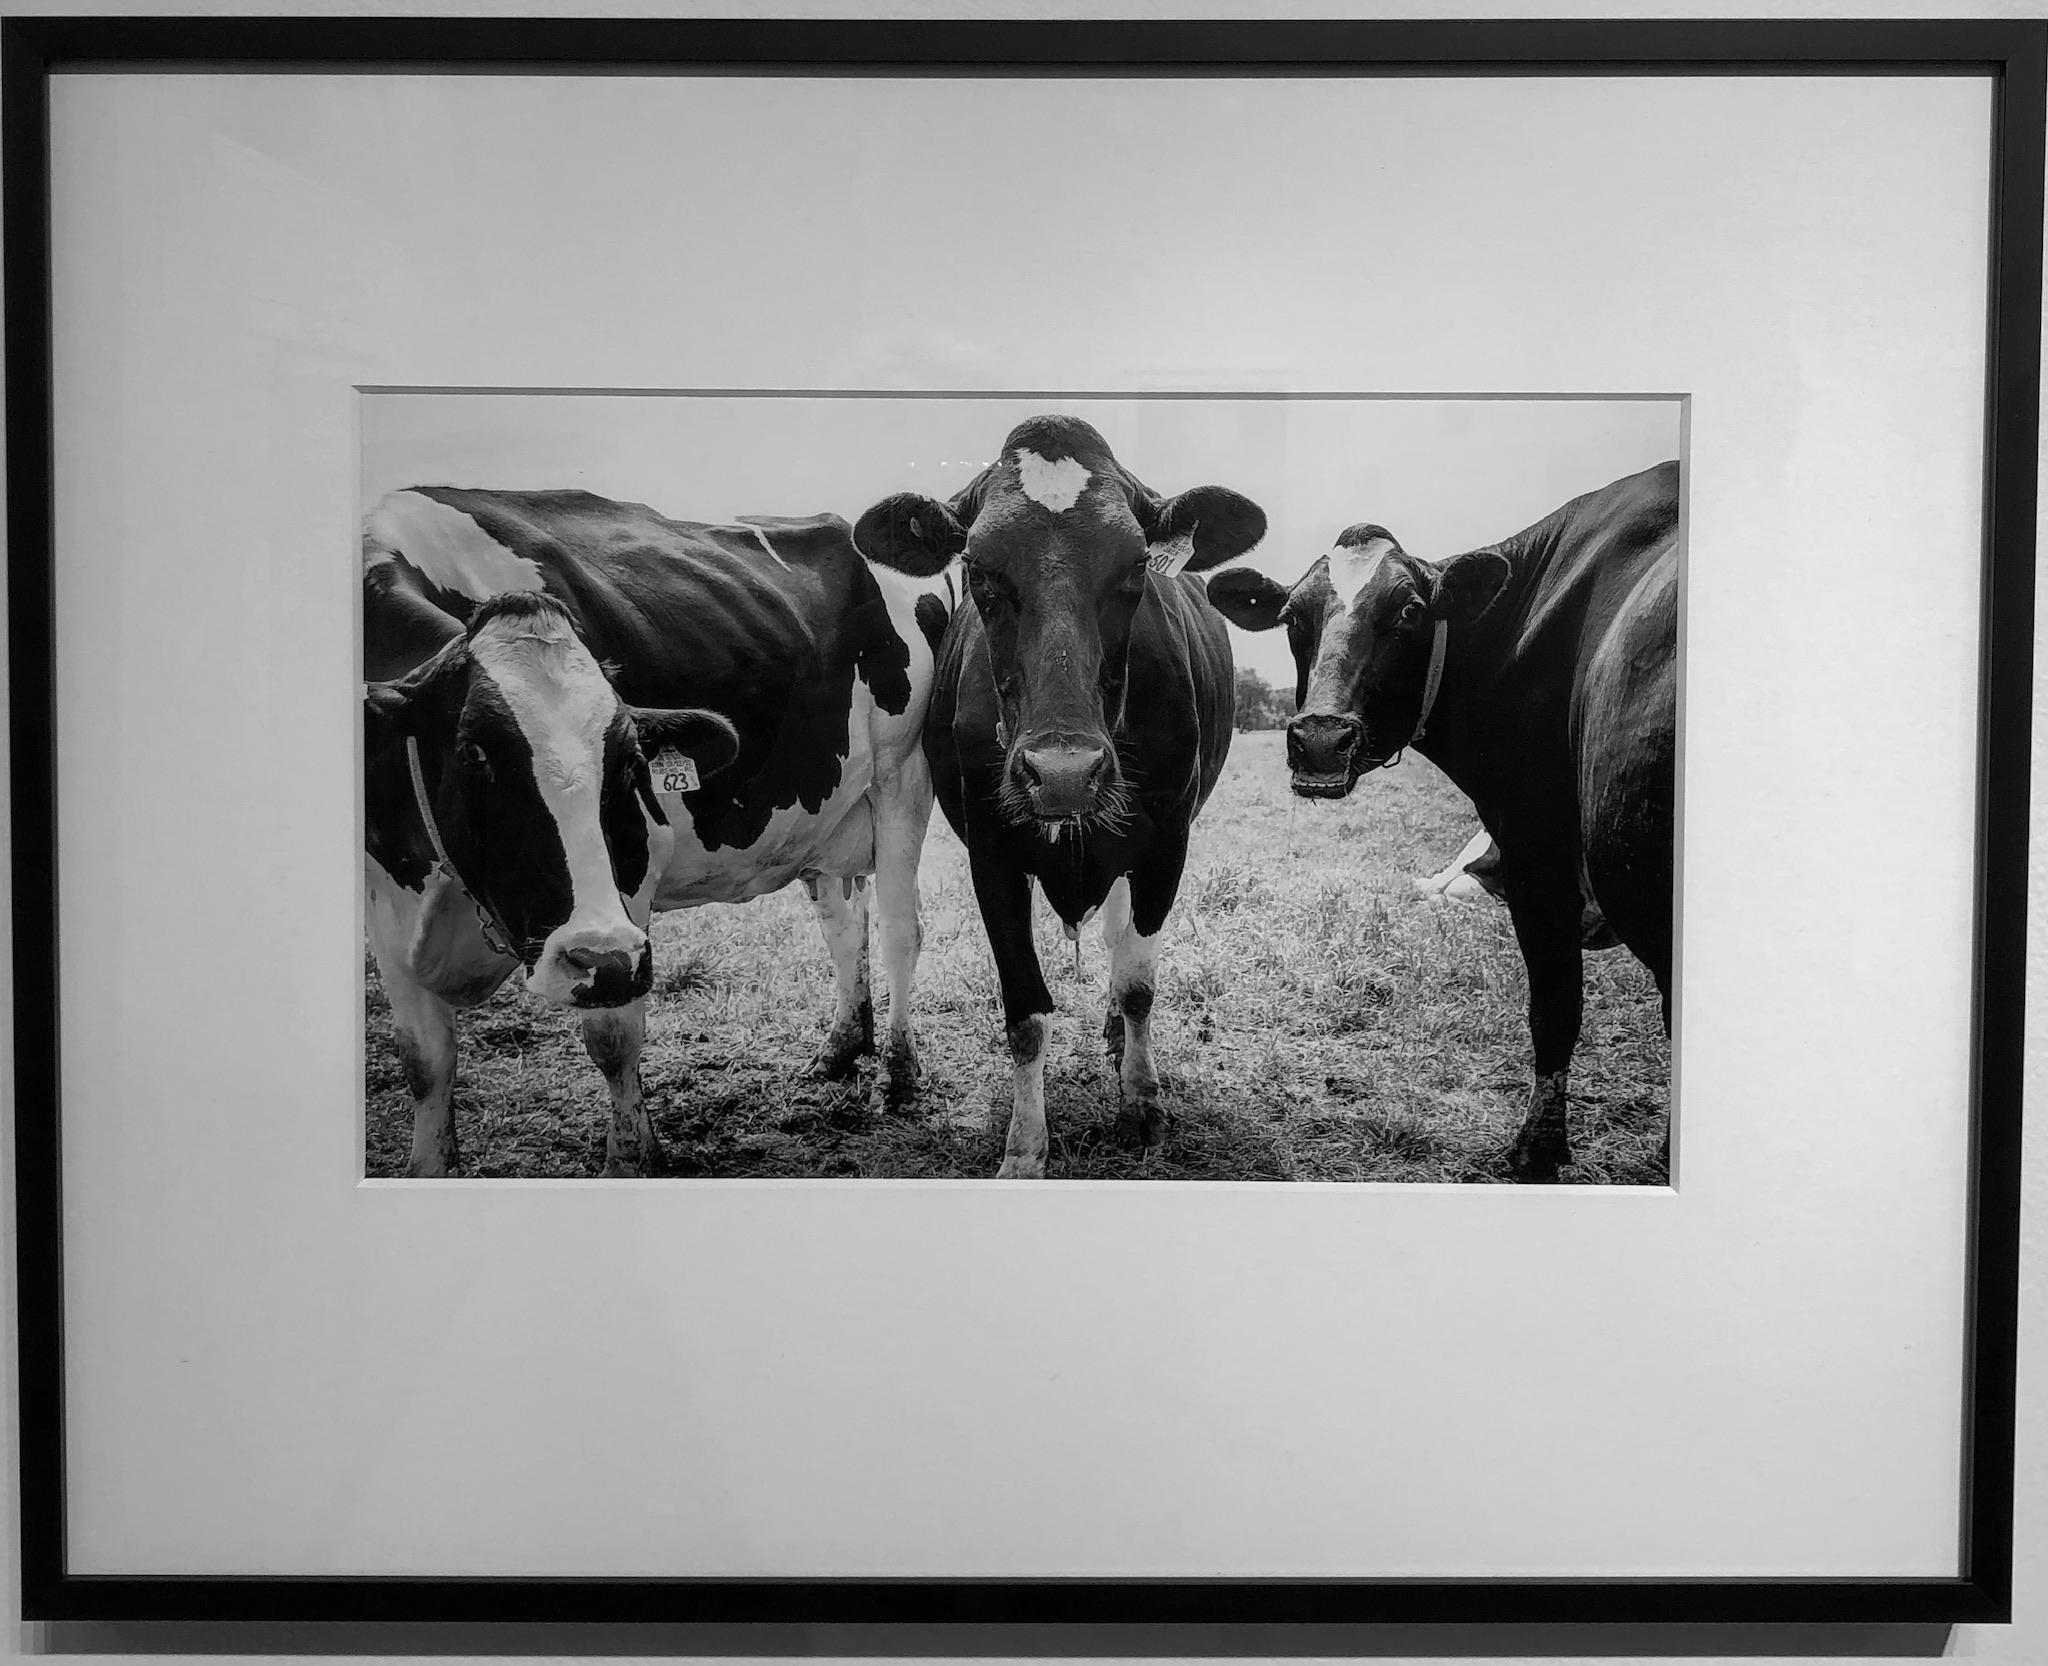 Cows, Kettle Moraine, WI, Framed Black and White Photo of Three Cows Looking  - Photograph by Kirill Polevoy